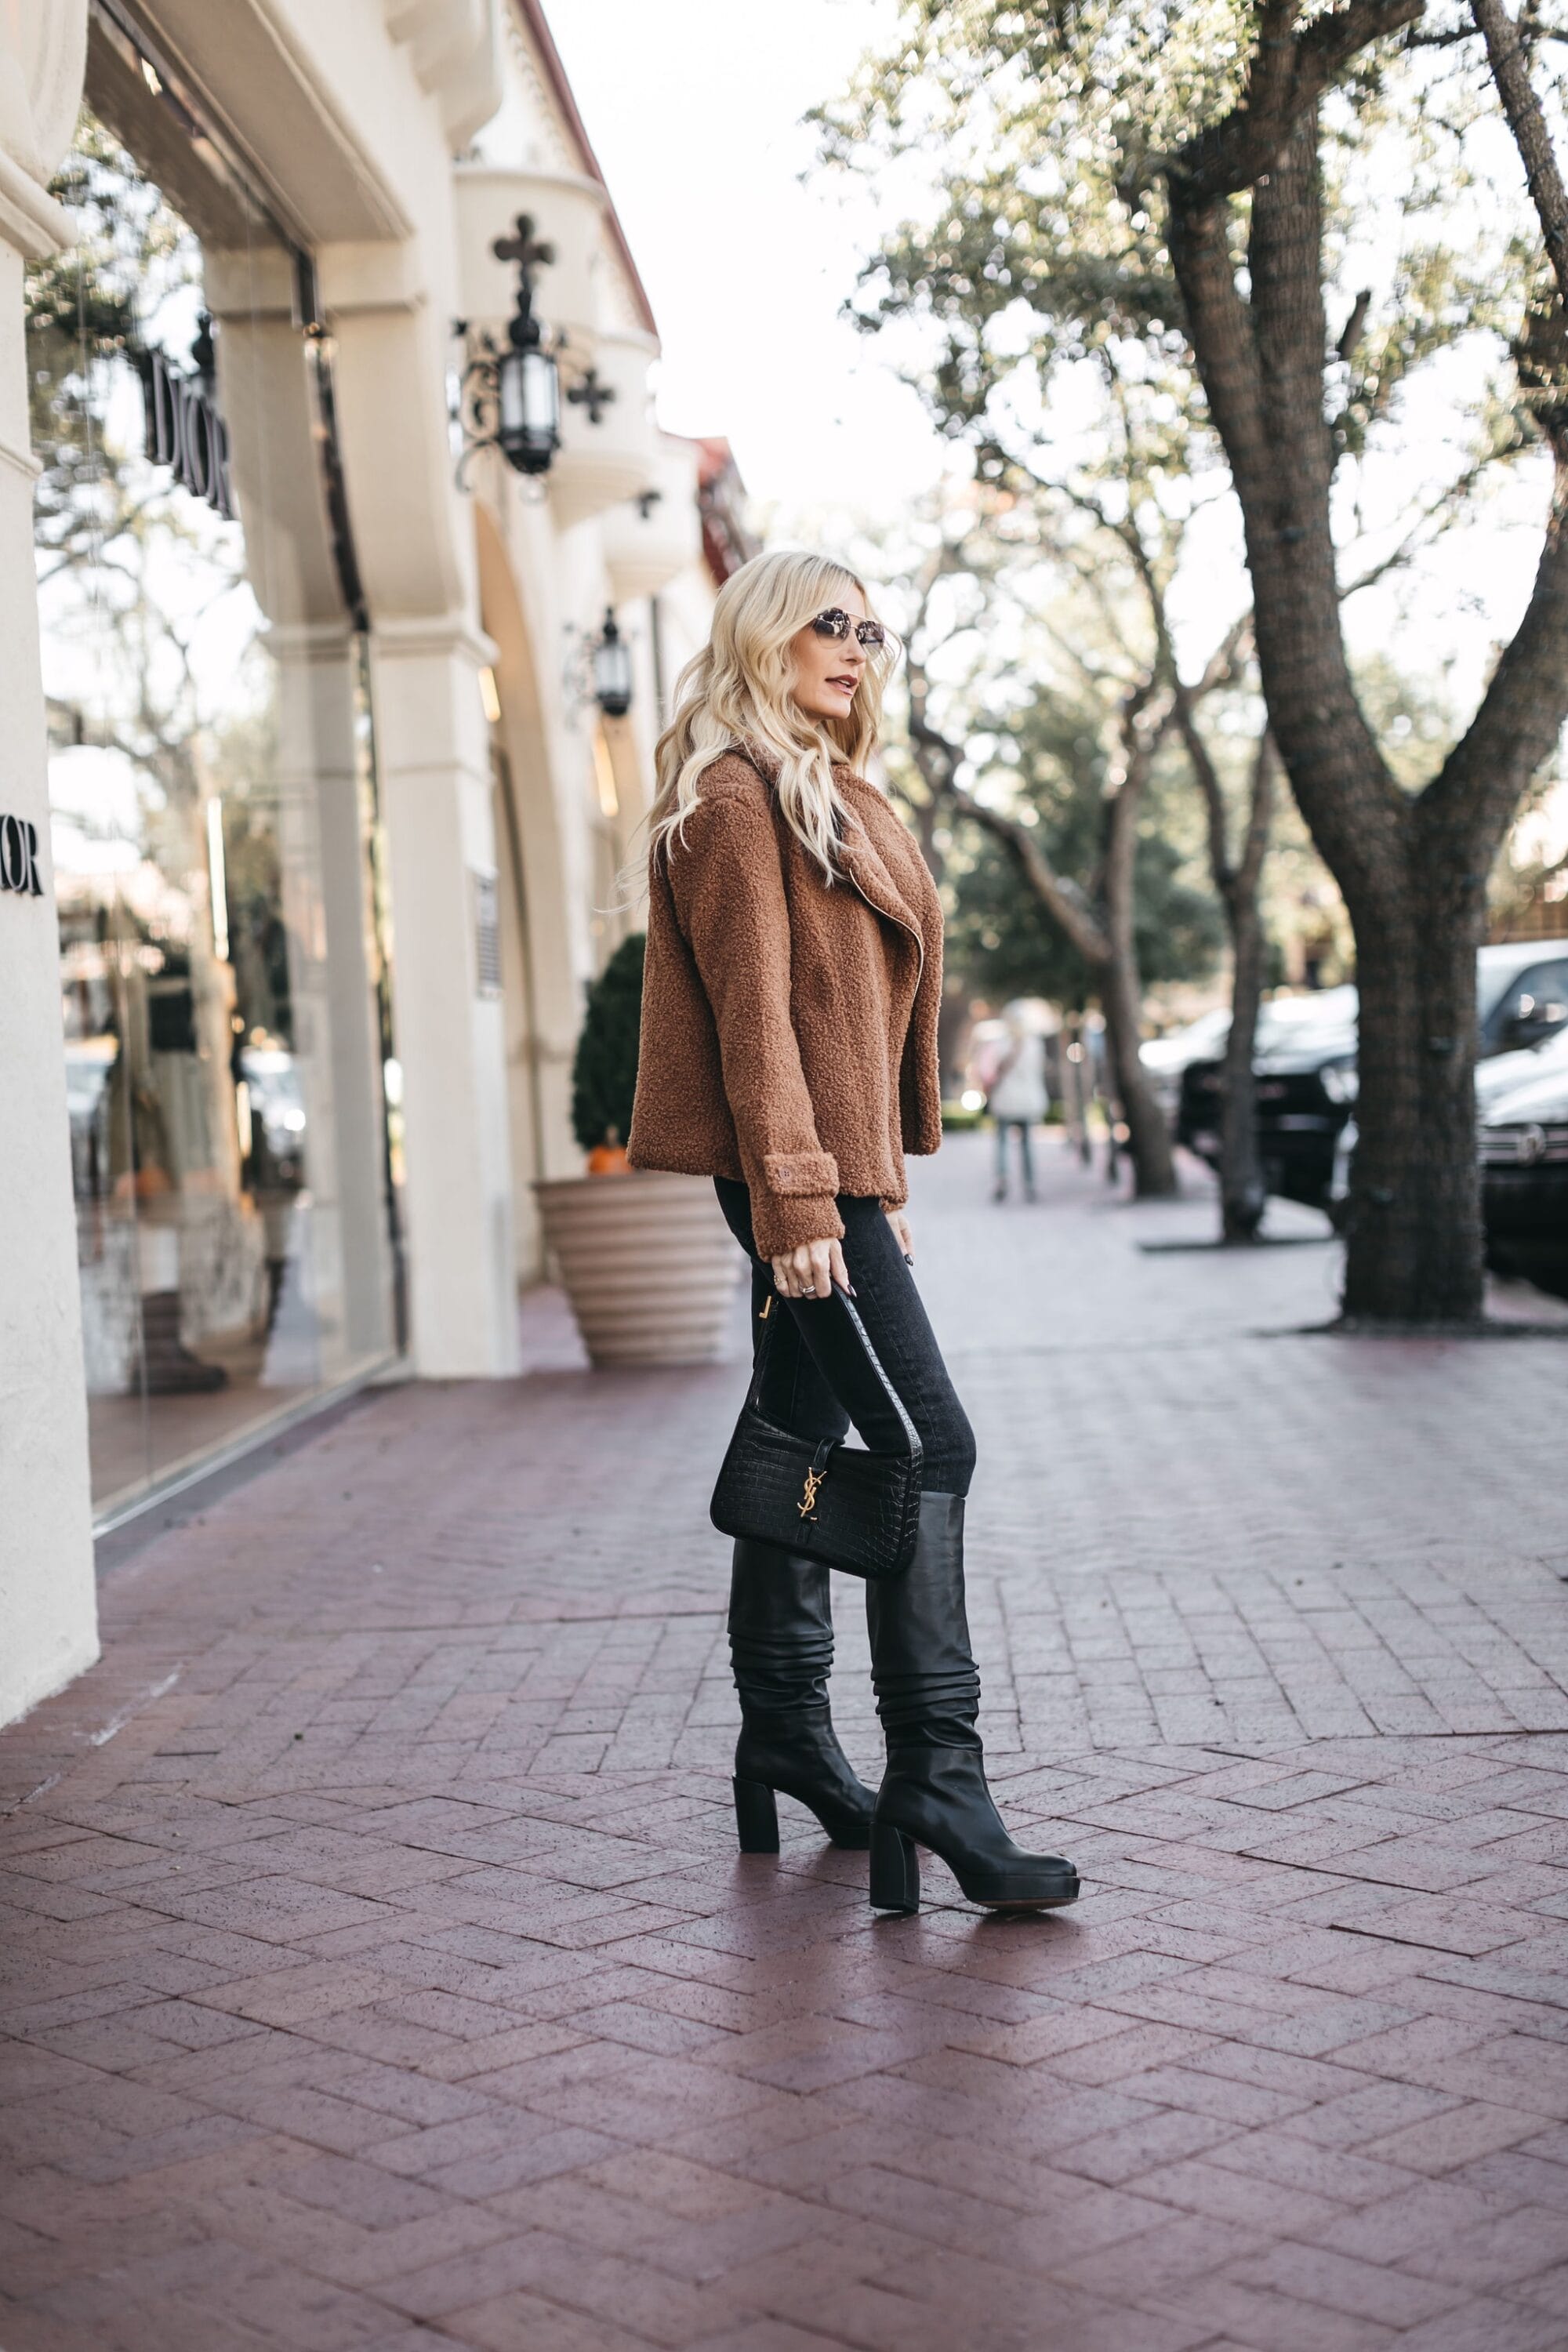 Over 40 fashion influencer showing how to style knee-high boots.